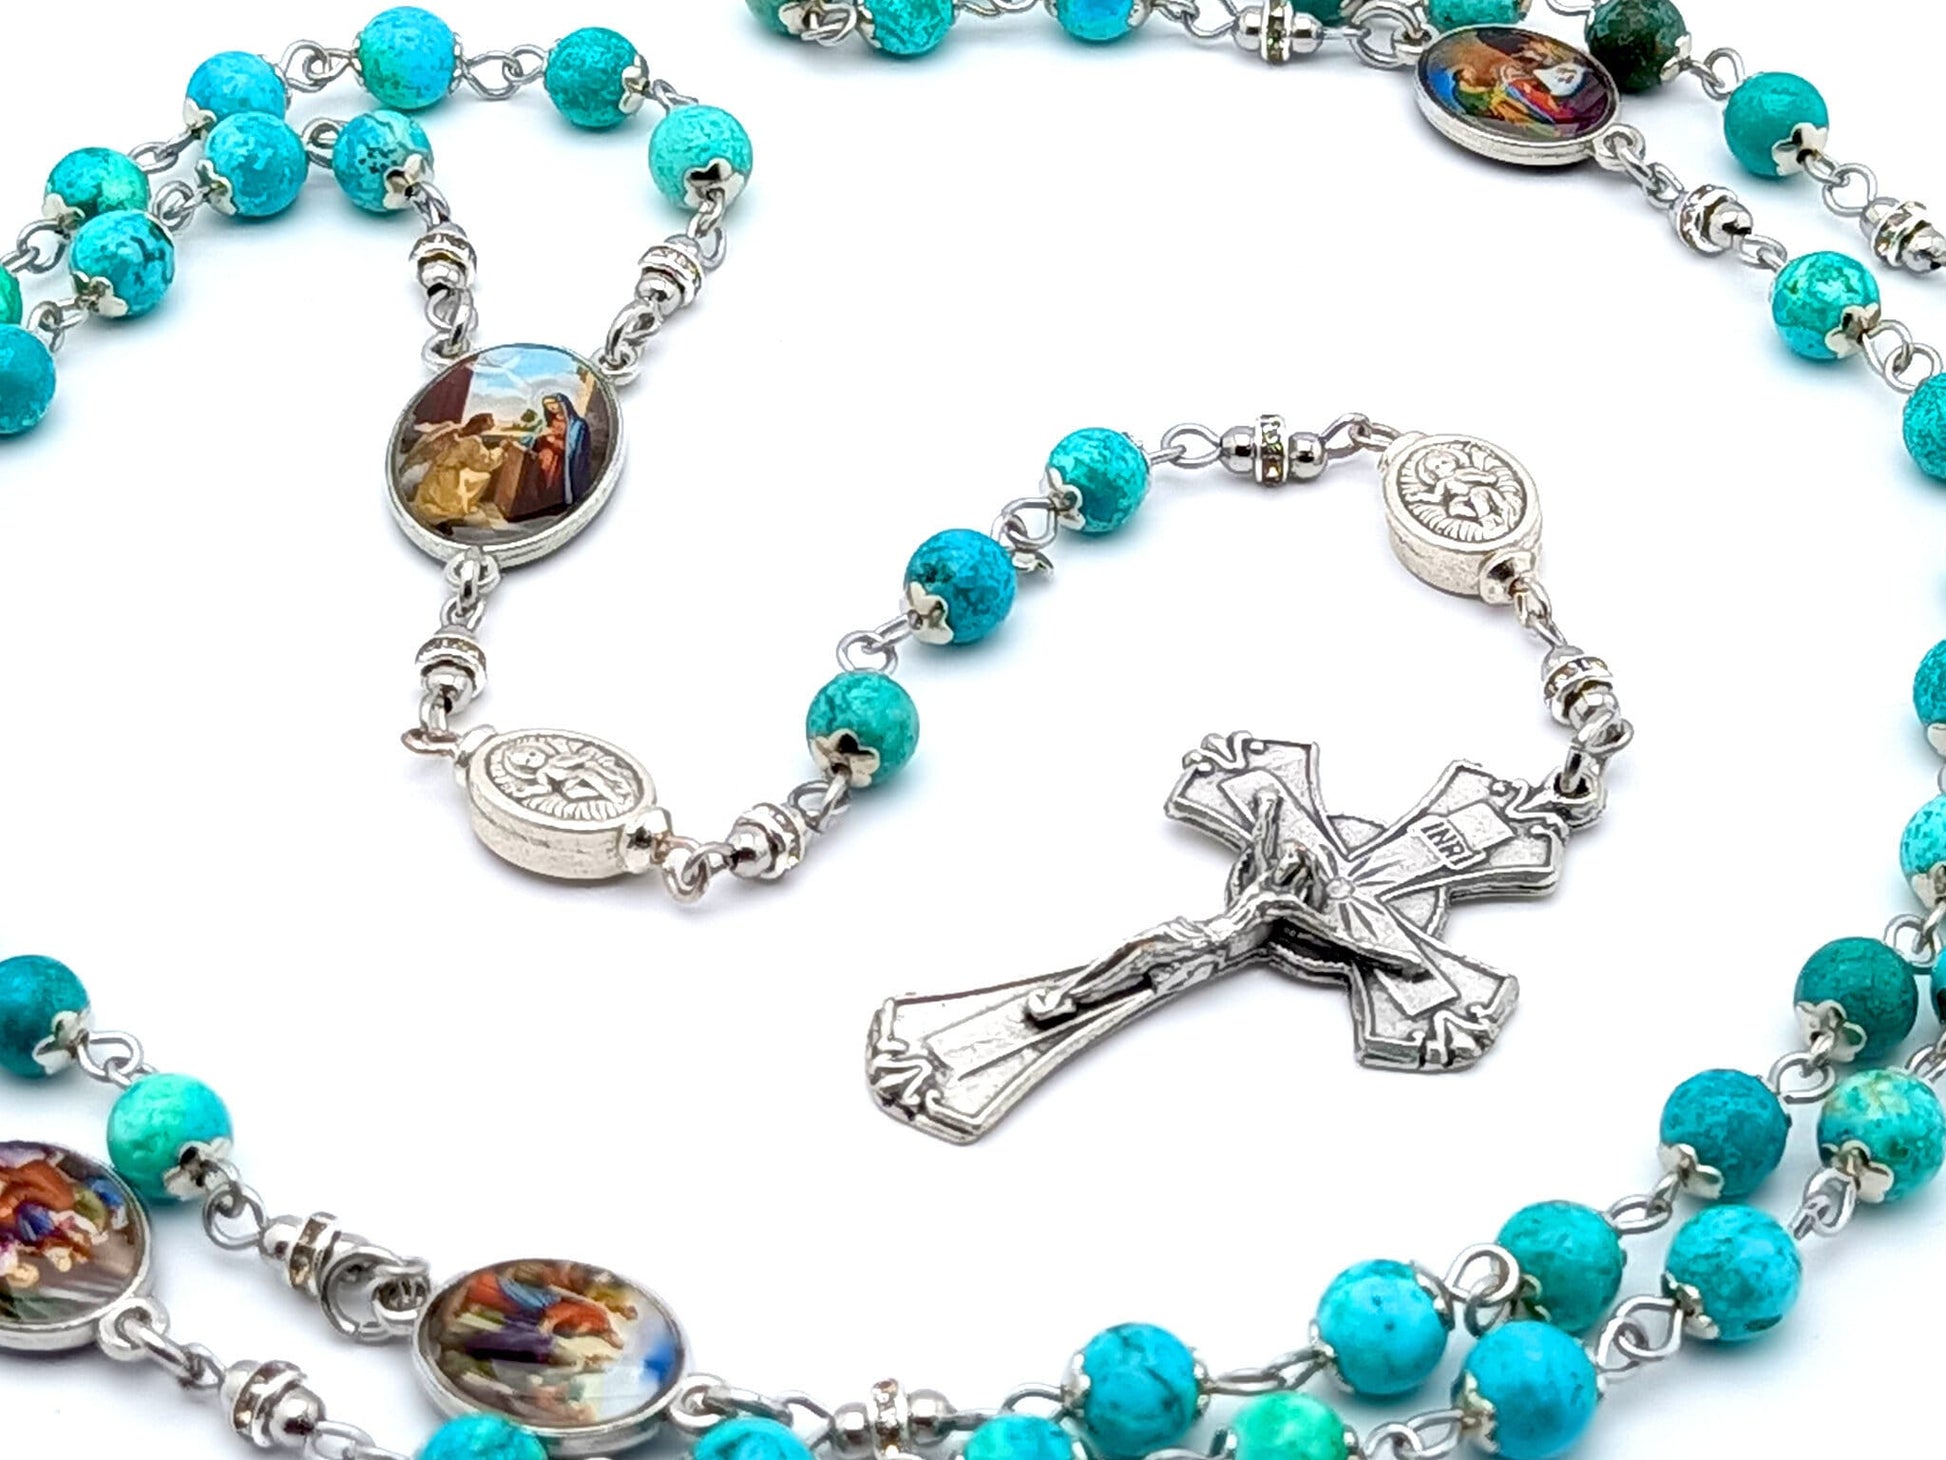 The Golrious Mysteries unique rosary beads with turquoise gemstone and Miraculous medal linking beads, silver crucifix and picture centre medal.